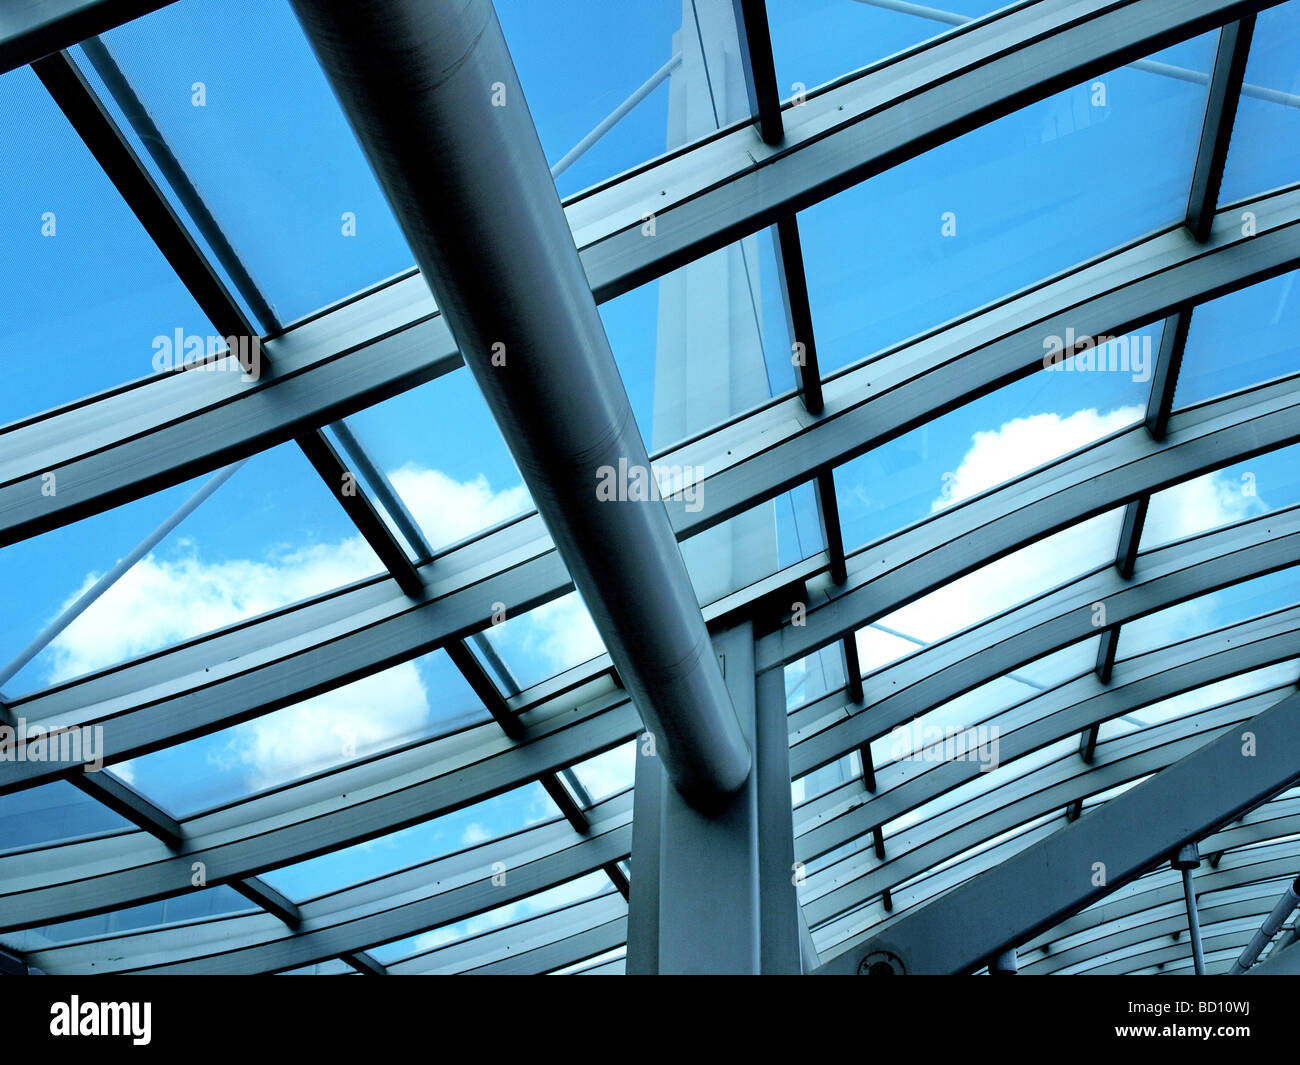 glass archway at airport looking upward to blue sky and white clouds architectural detail crossbeams and posts Stock Photo